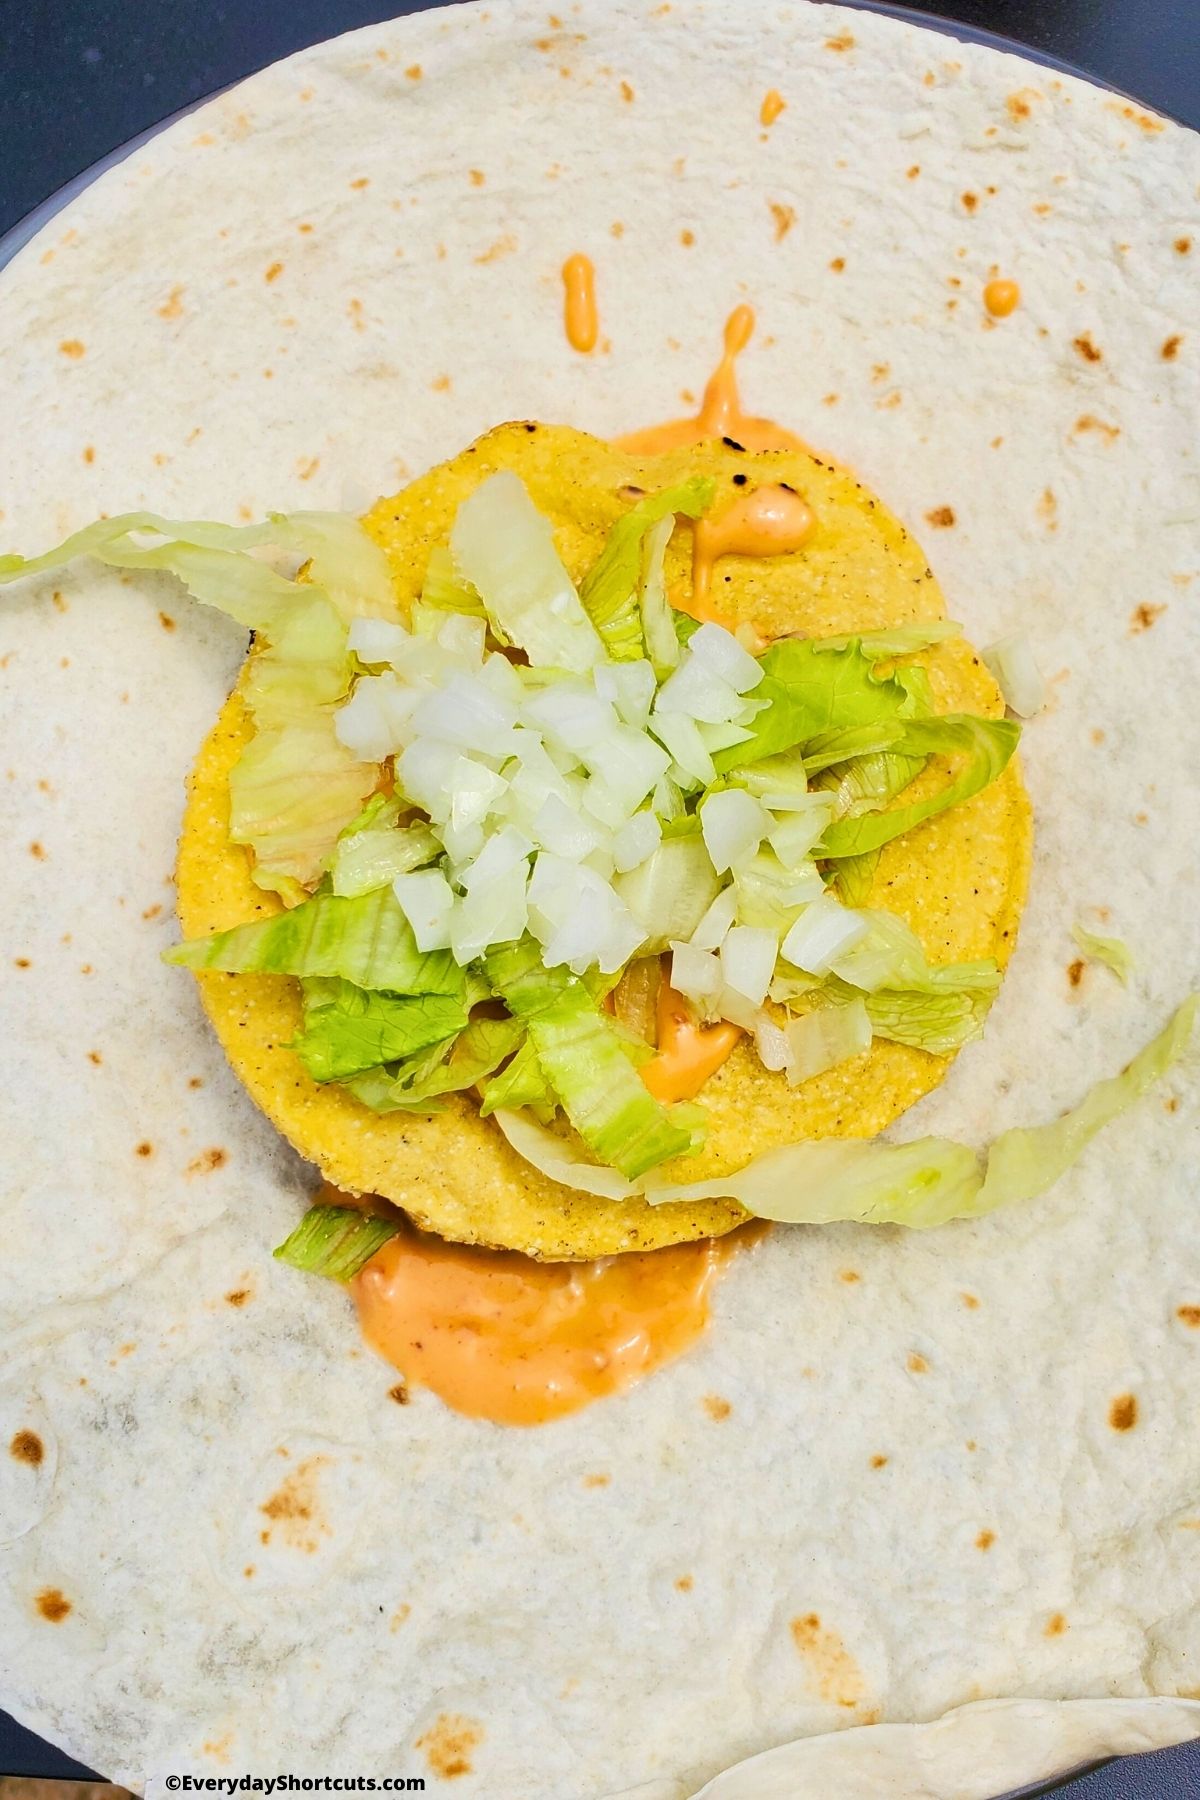 lettuce and onions topping on crunchy tortilla